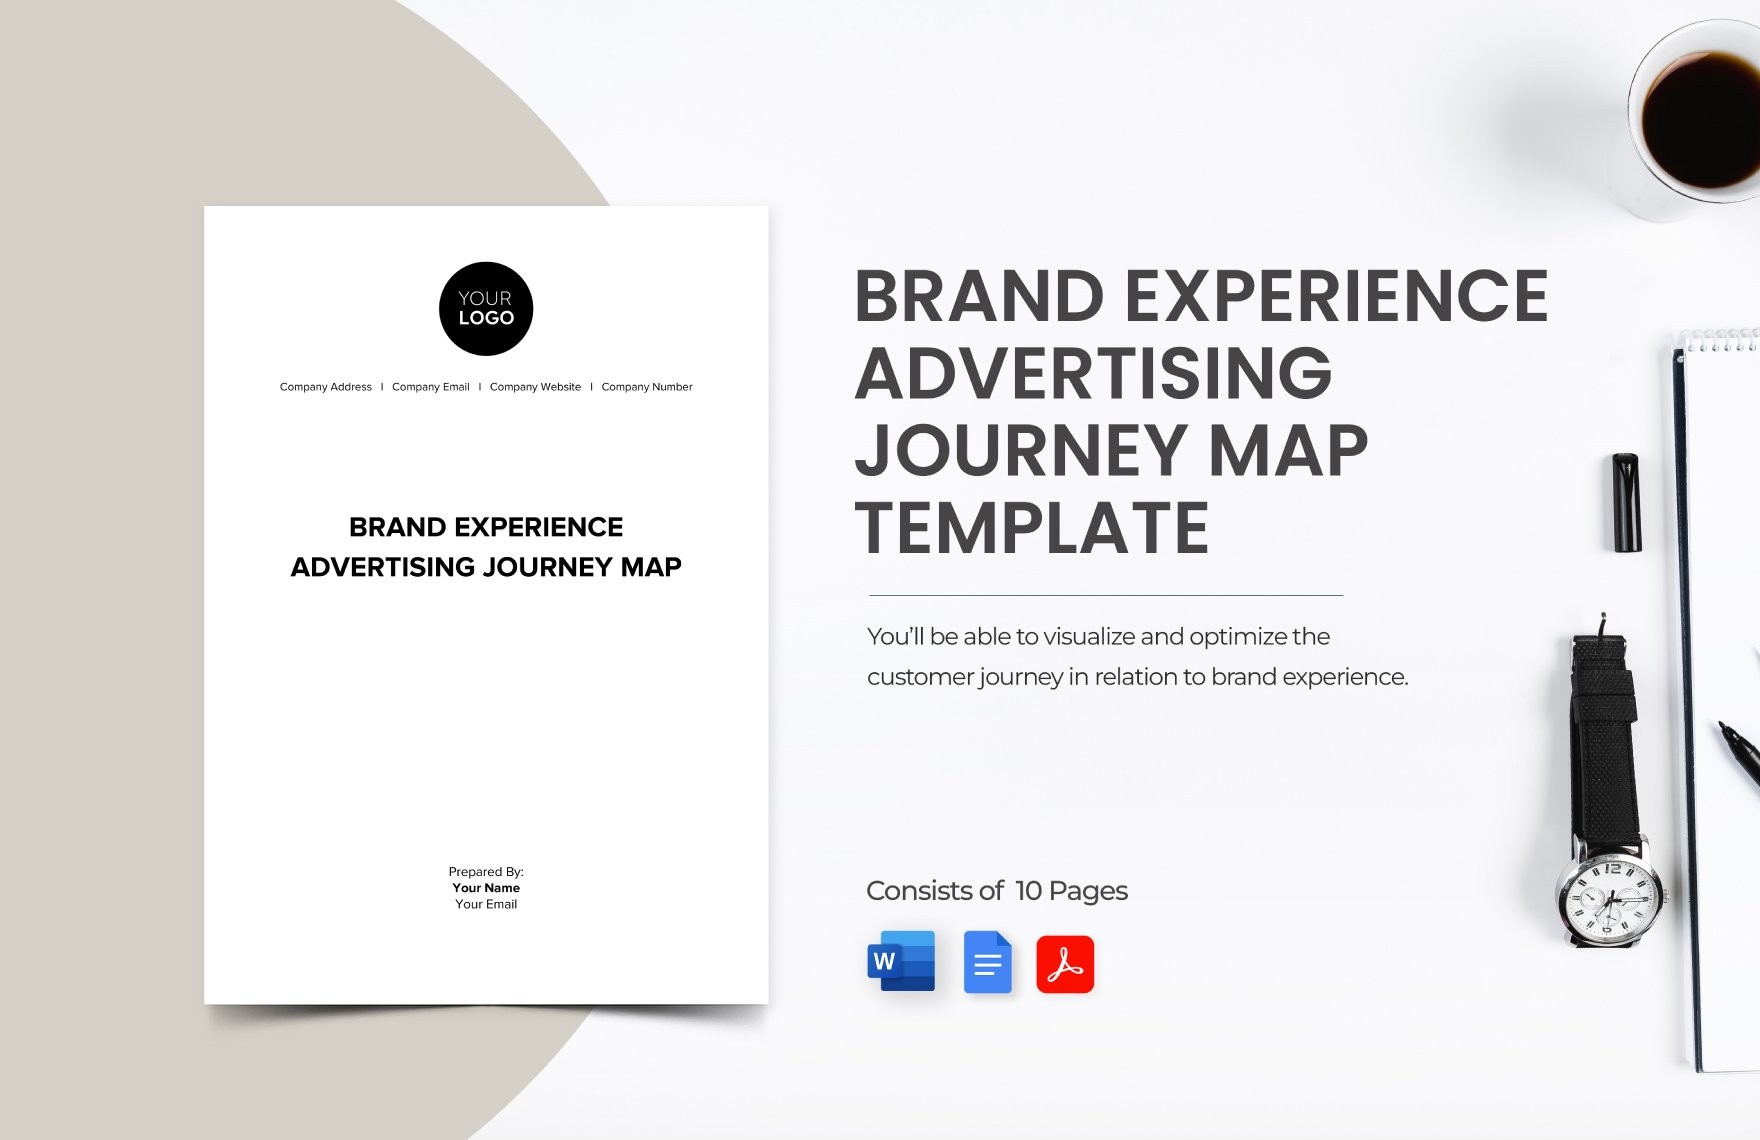 Brand Experience Advertising Journey Map Template